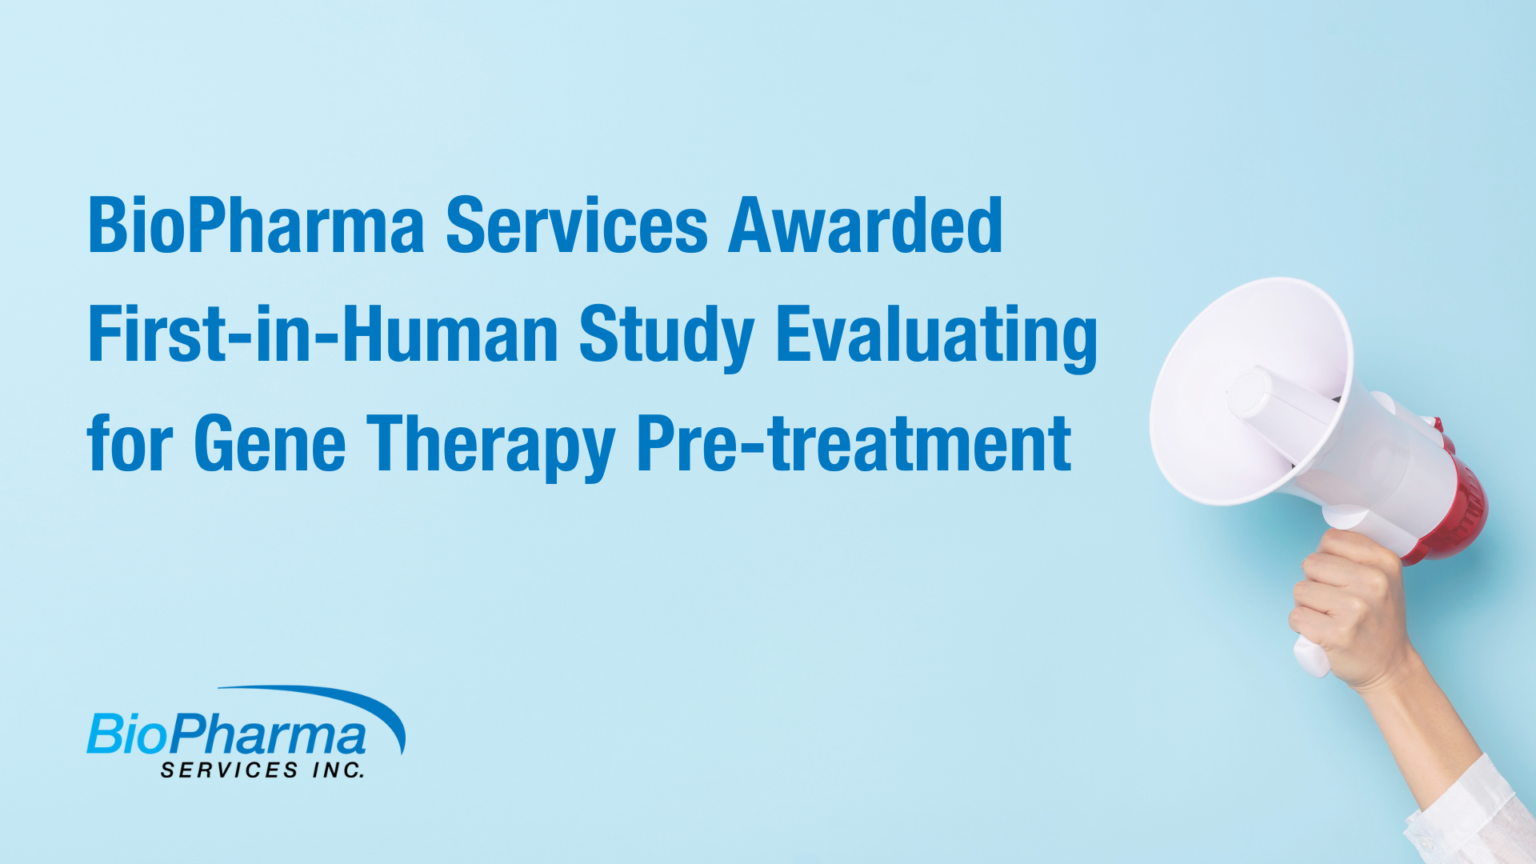 BioPharma Services Awarded First-in-Human Study Evaluating for Gene Therapy Pre-treatment - BioPharma Services